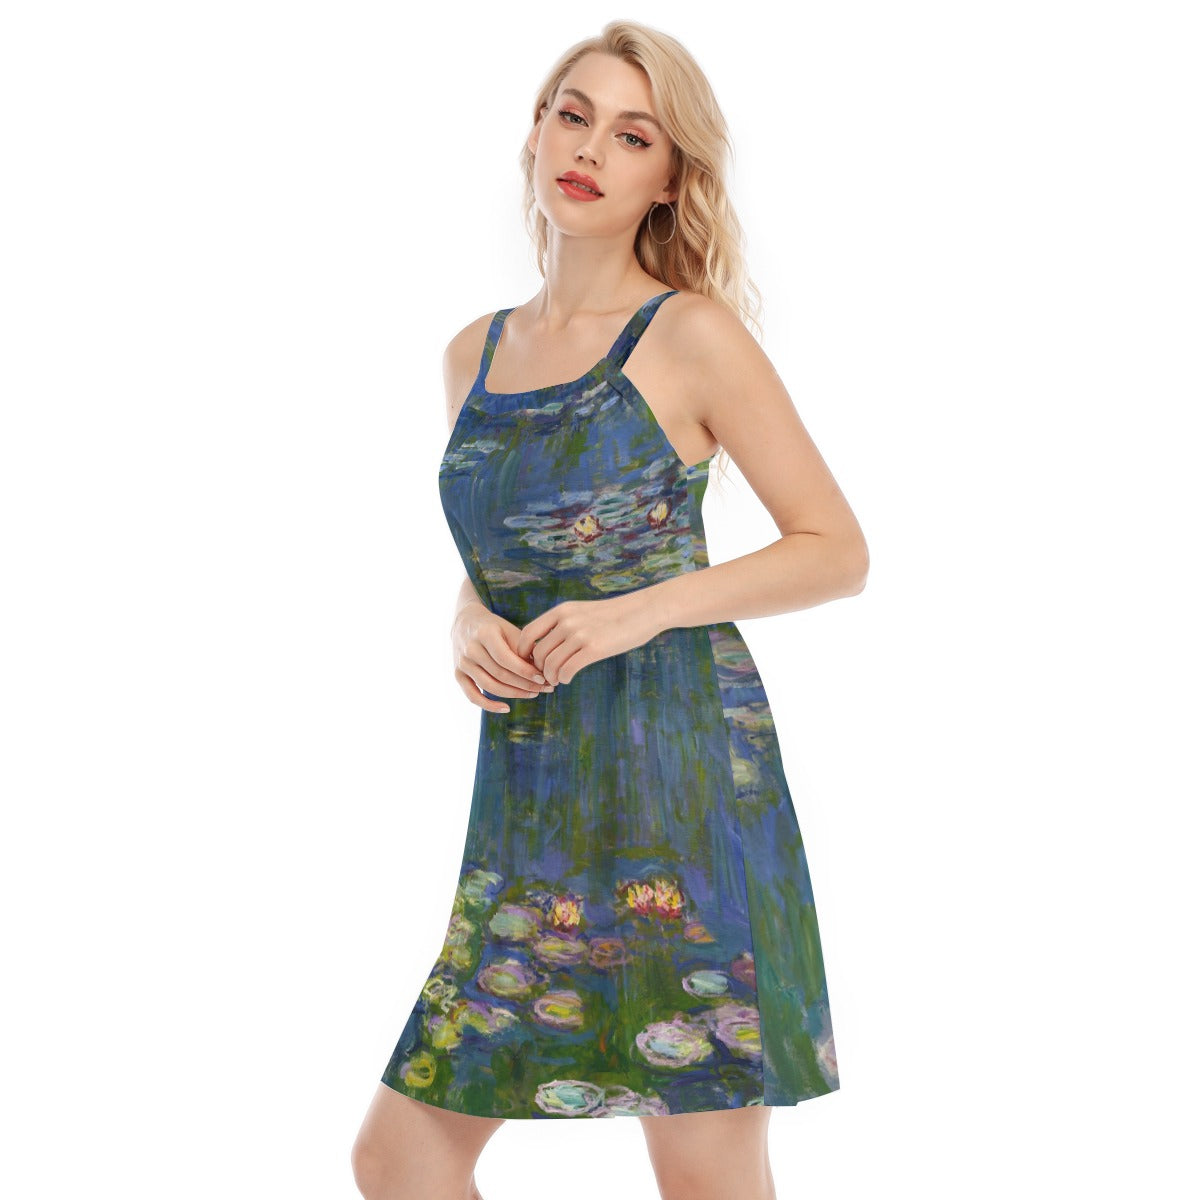 Women's Wearable Art - Ethereal Floral Attire